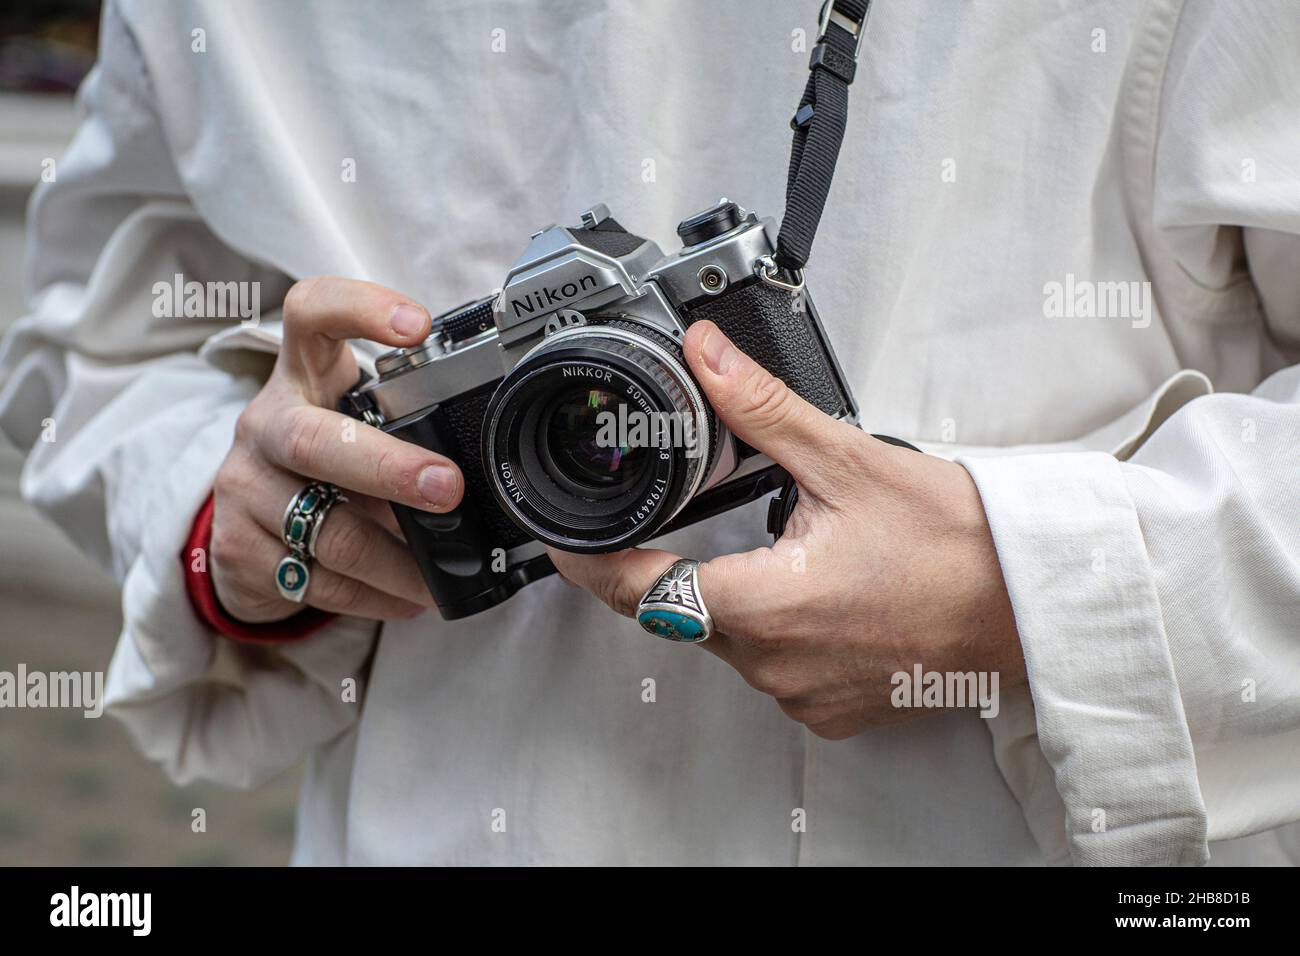 close up of a man holding a retro camera, front view Stock Photo